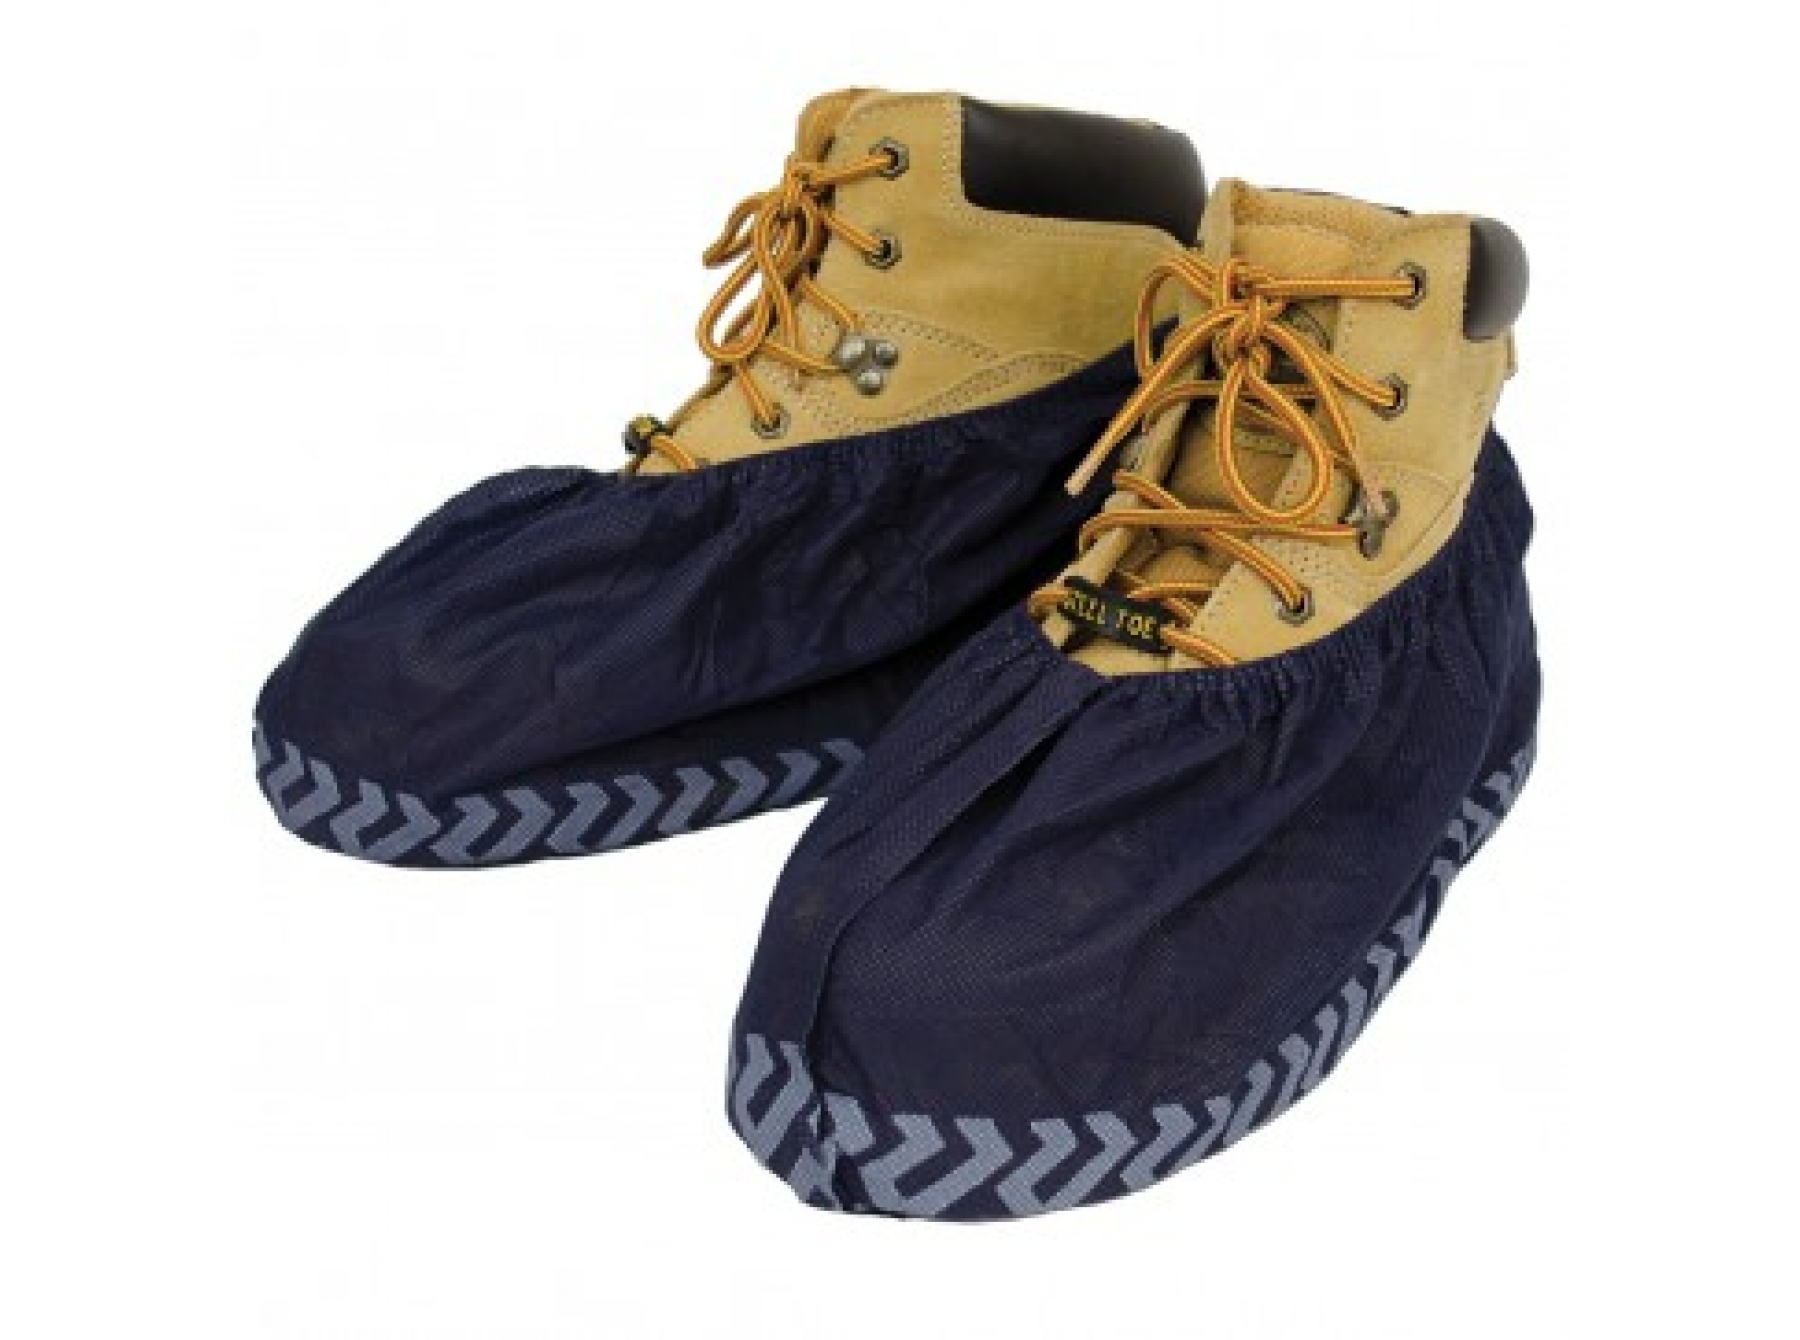 Shubee Shoe Covers - Available in 